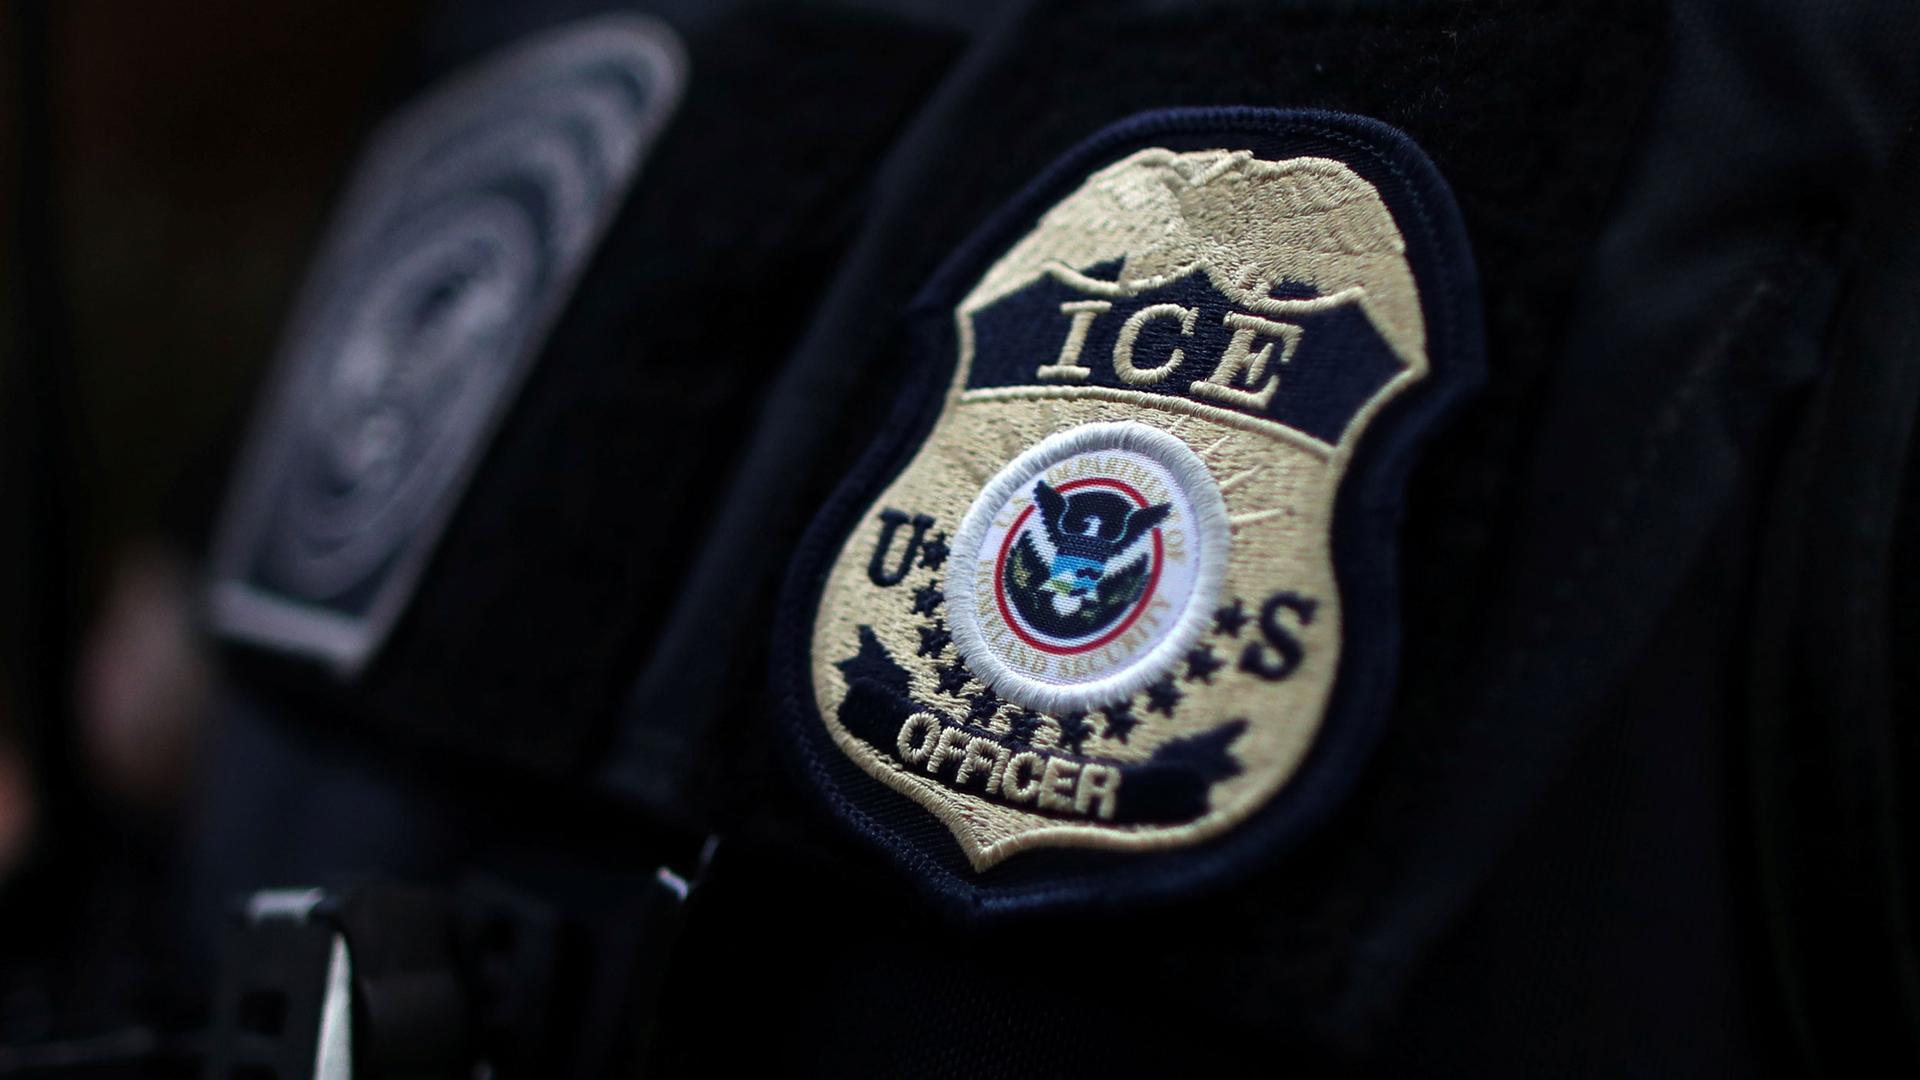 The sewn badge of an ICE officer is shown on the shoulder of an offfical.